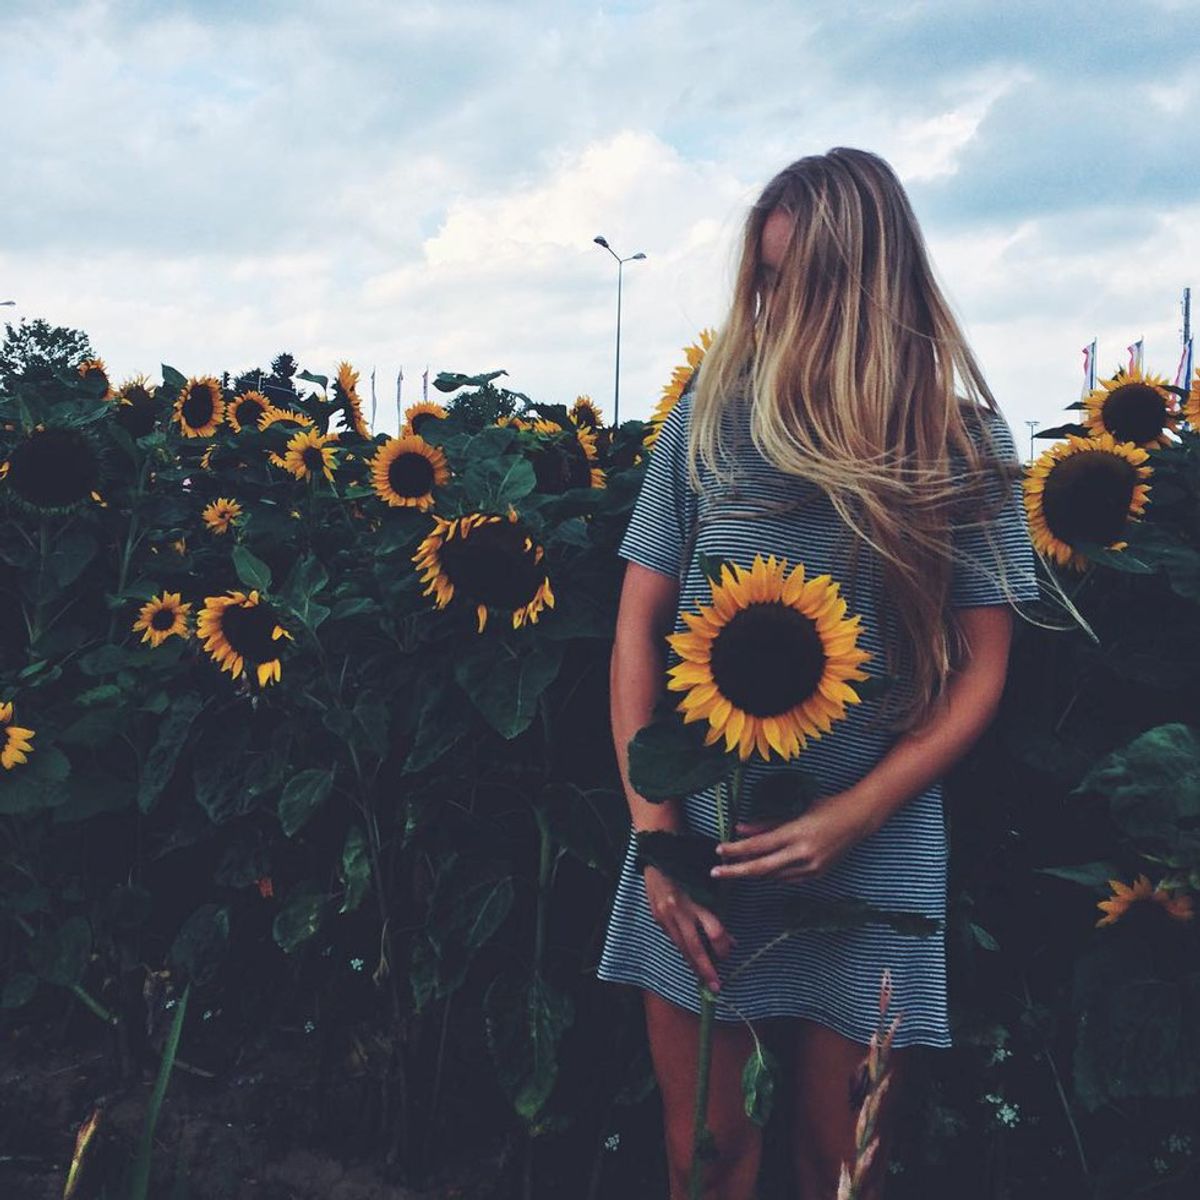 Are You A Human Or A Sunflower?